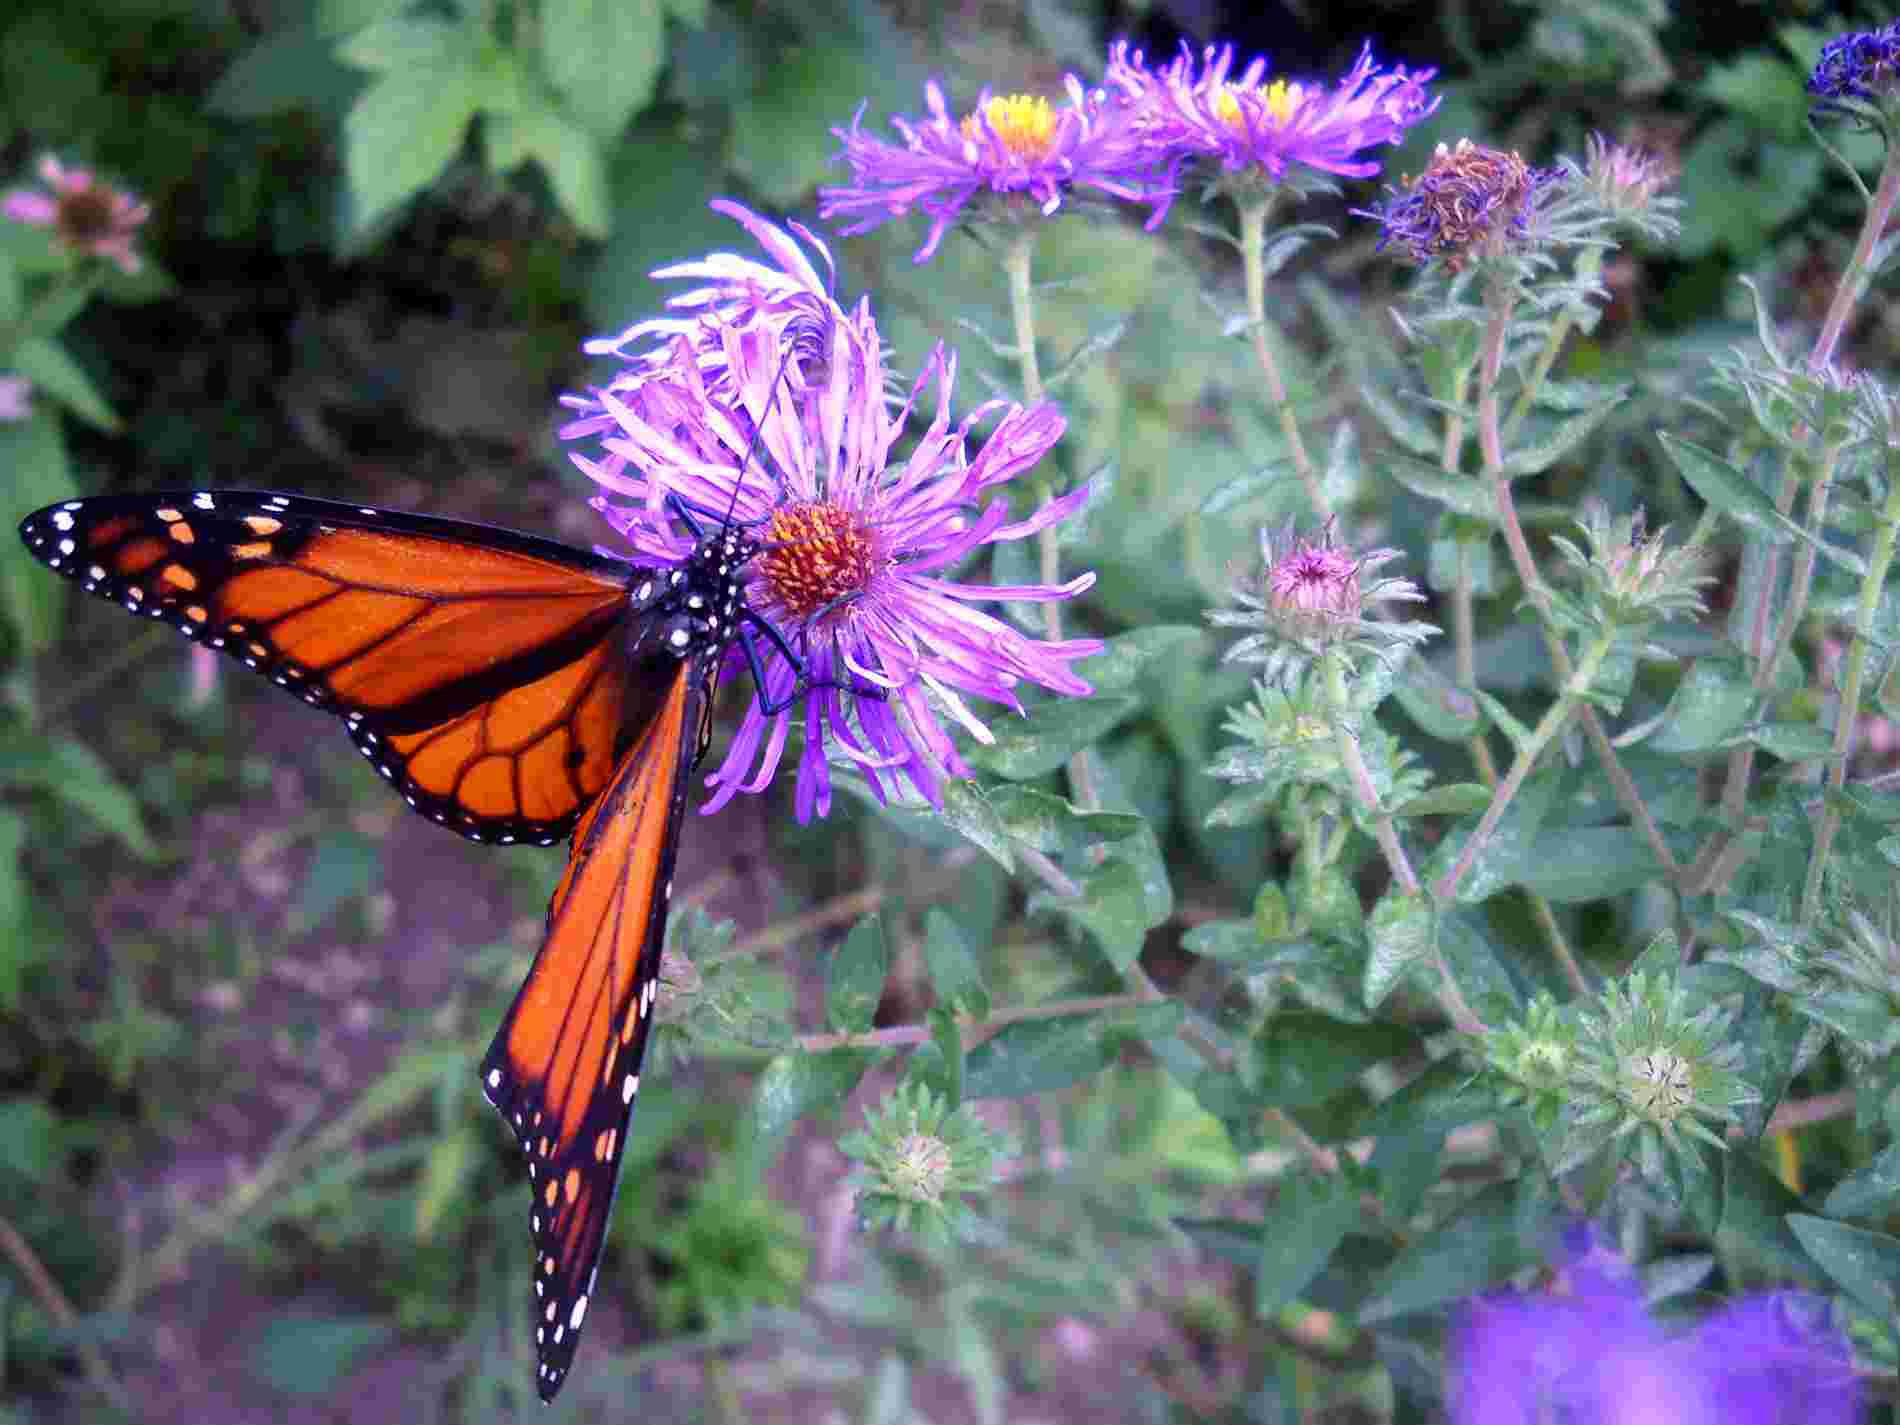 A Monarch during a brief "nectar and go" landing in our neighborhood, by Shamanic Shift (a.k.a. ECP) on Flickr.com